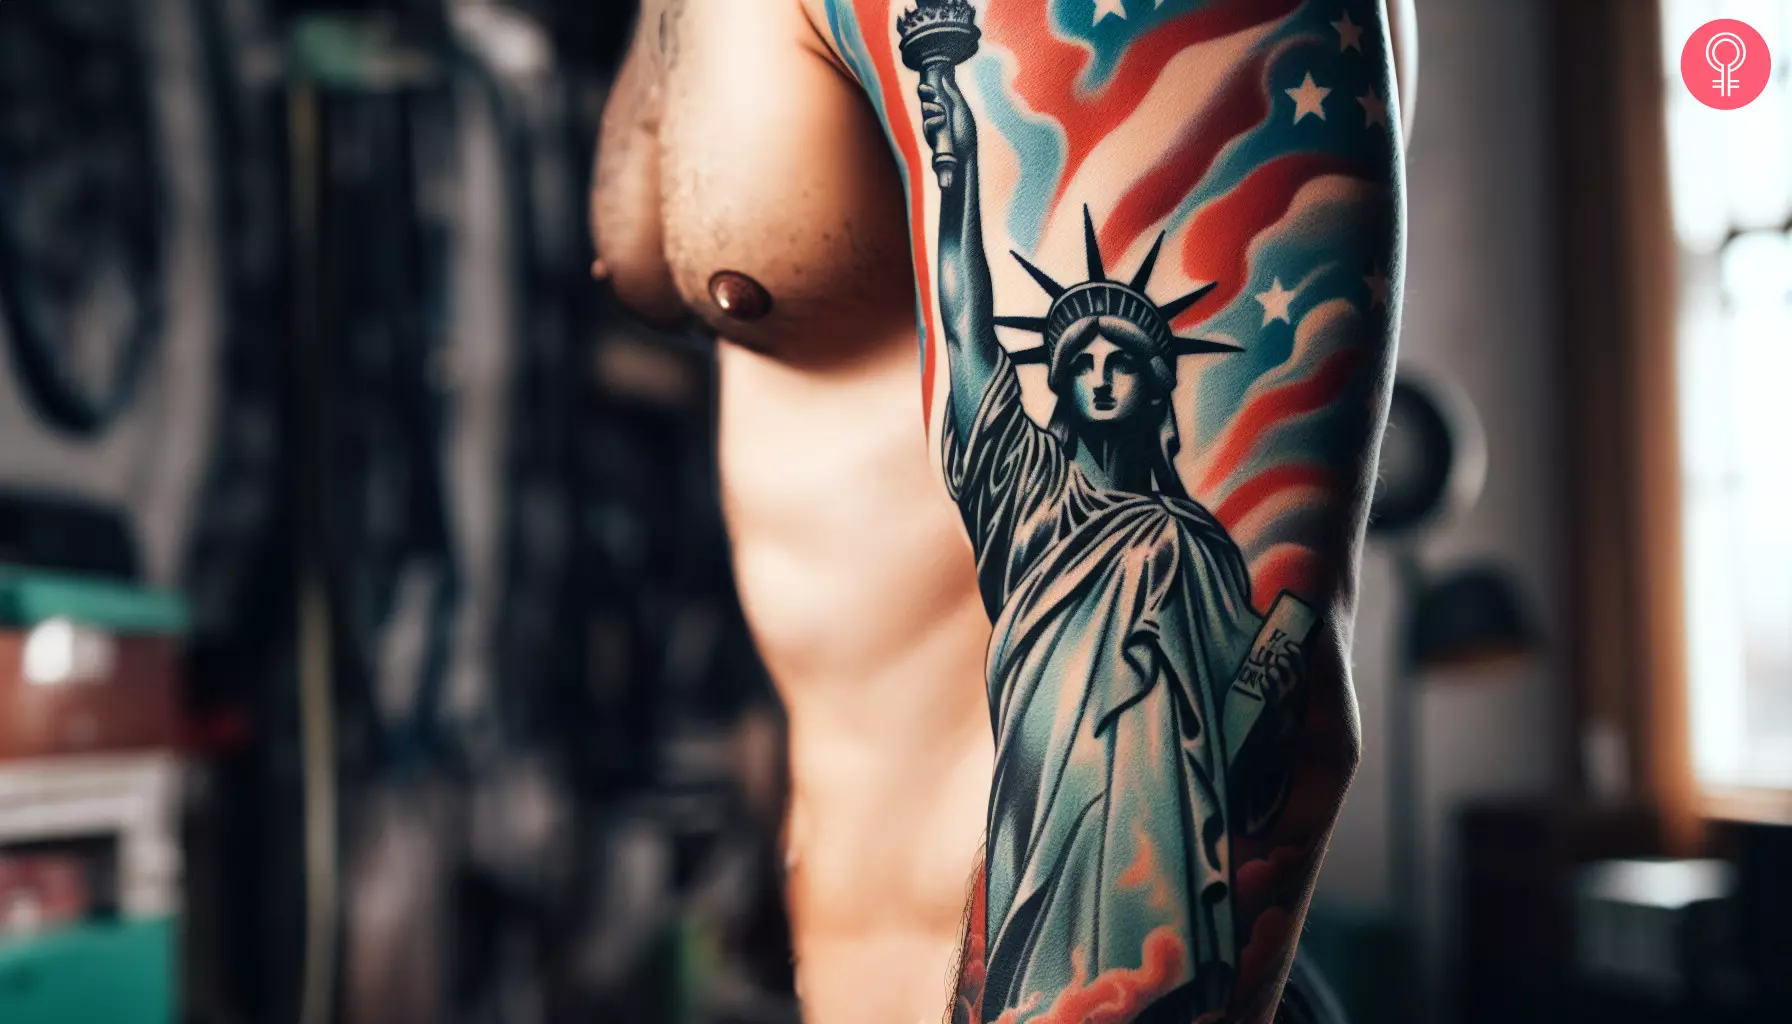 A man with a freedom sleeve tattoo